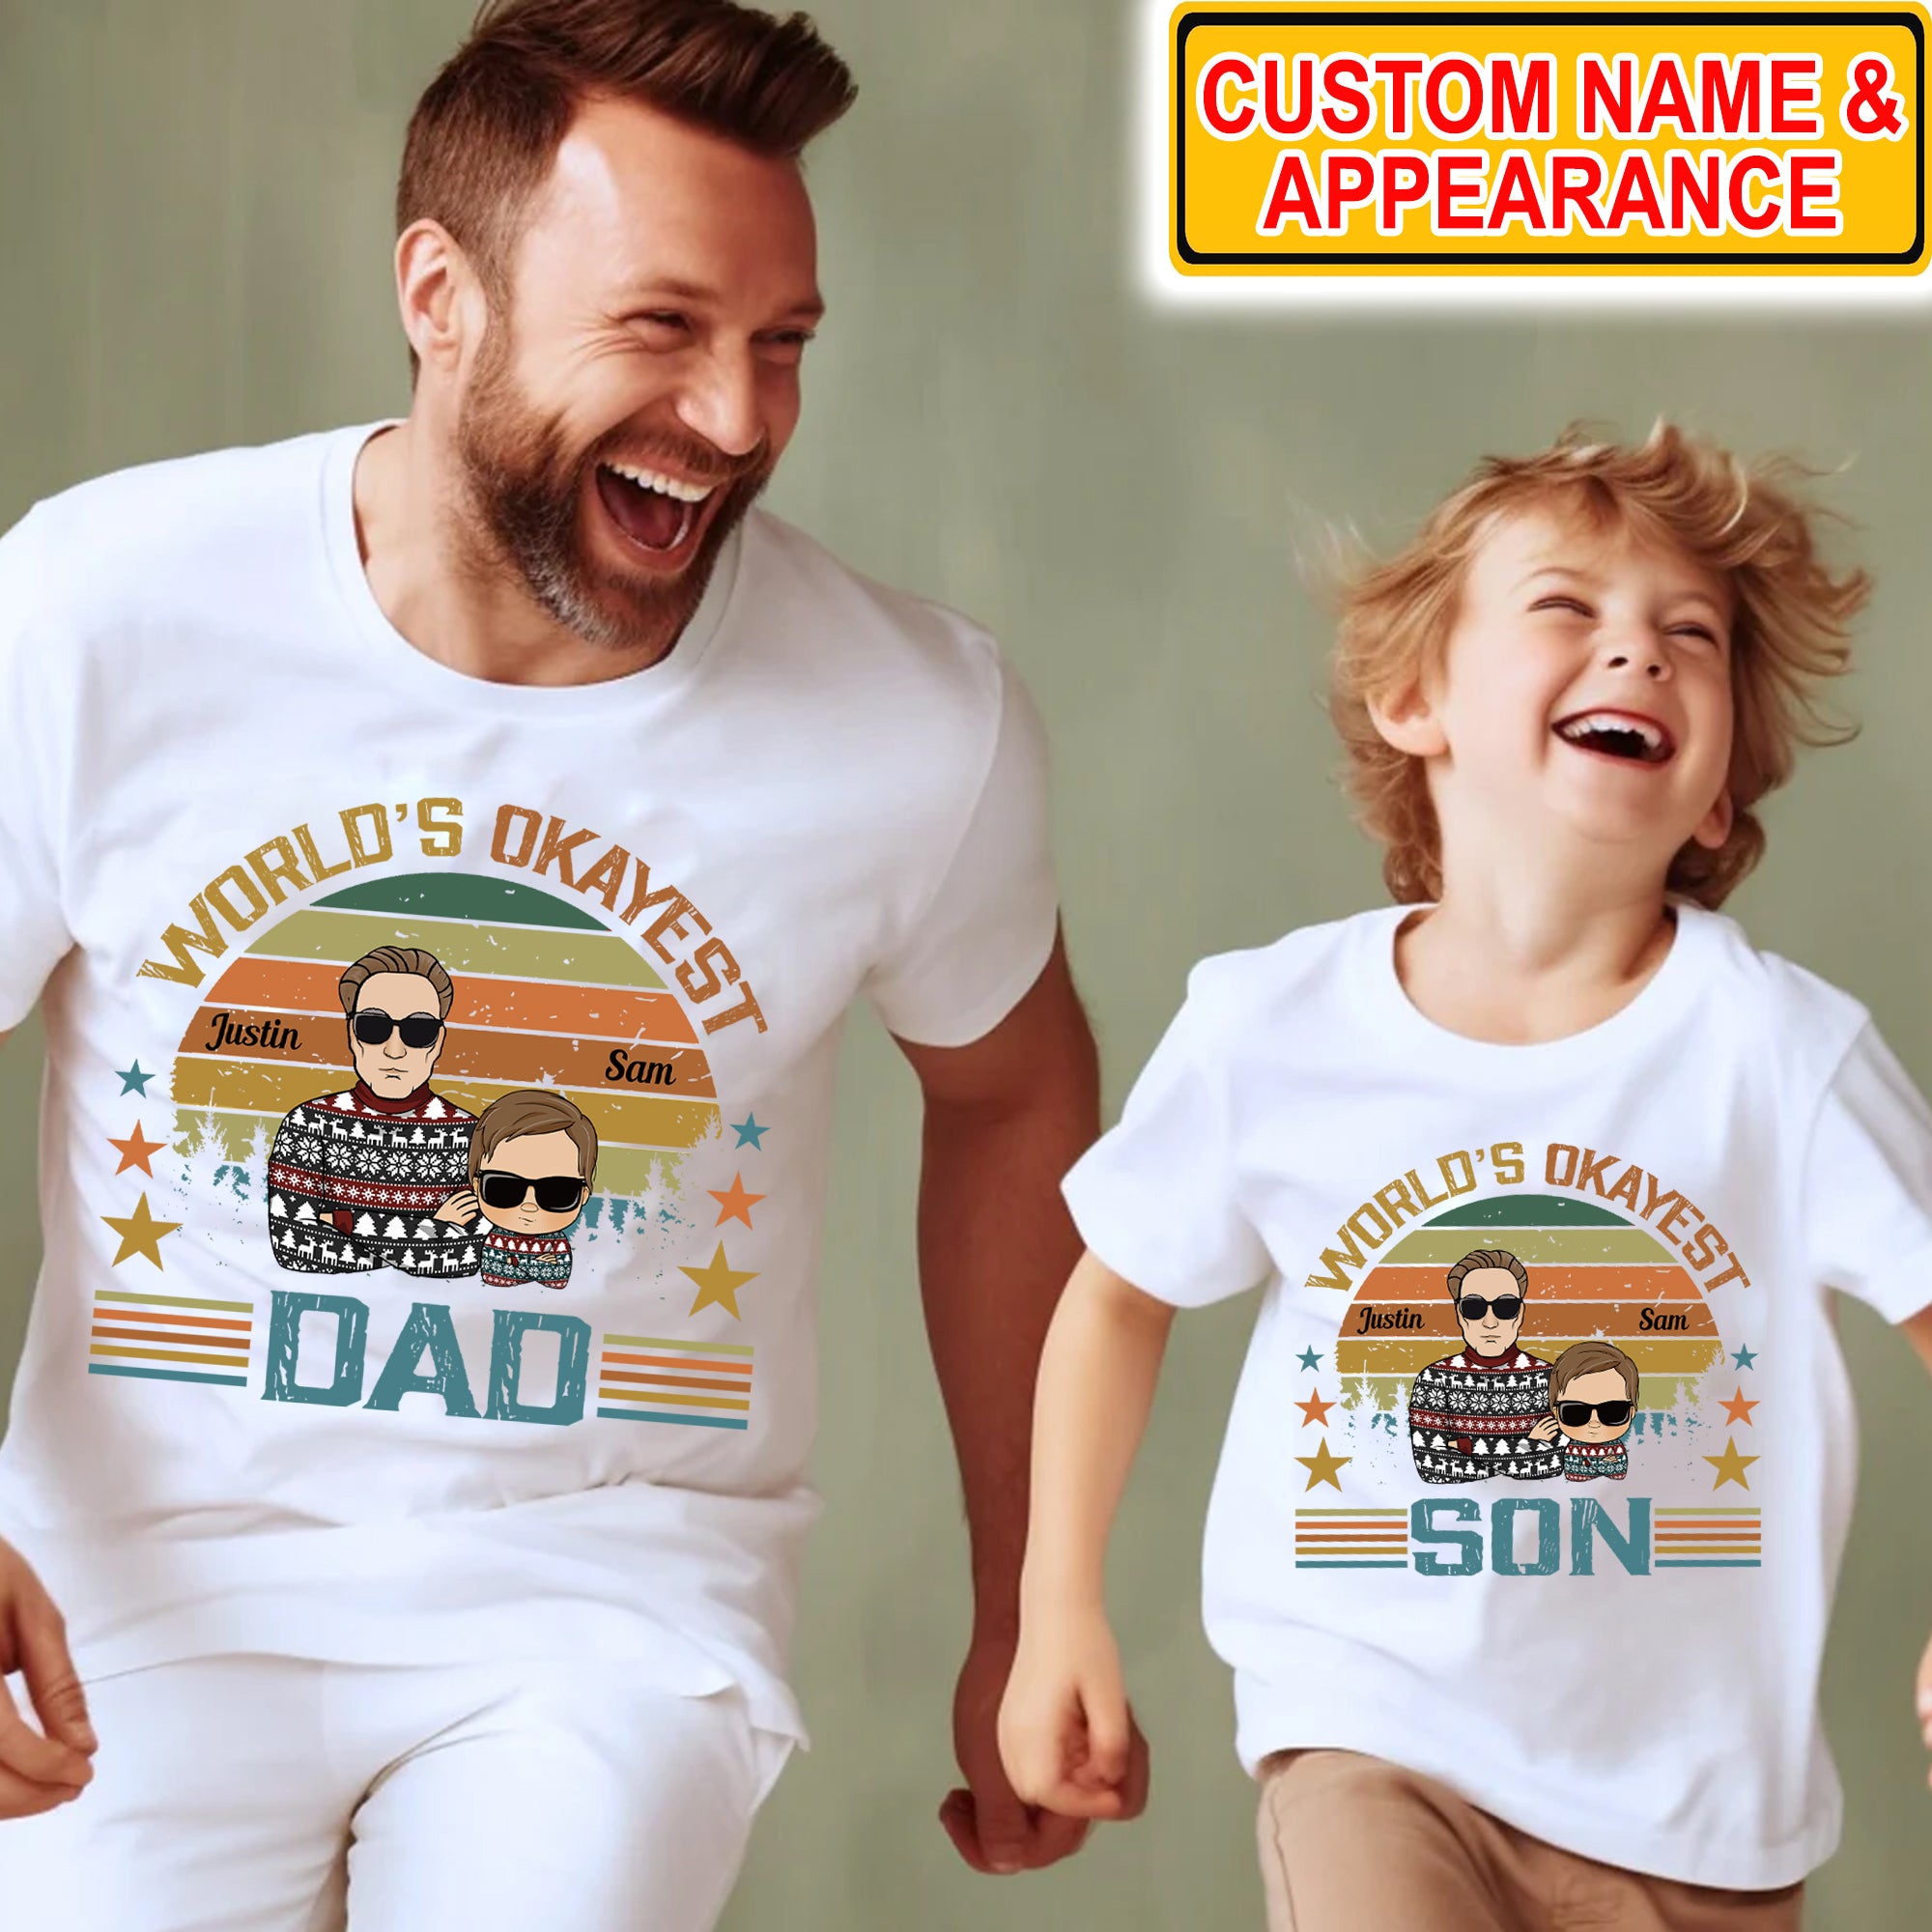 World's Okayest, Custom Appearance And Name - Personalized T-Shirt - Family Gift